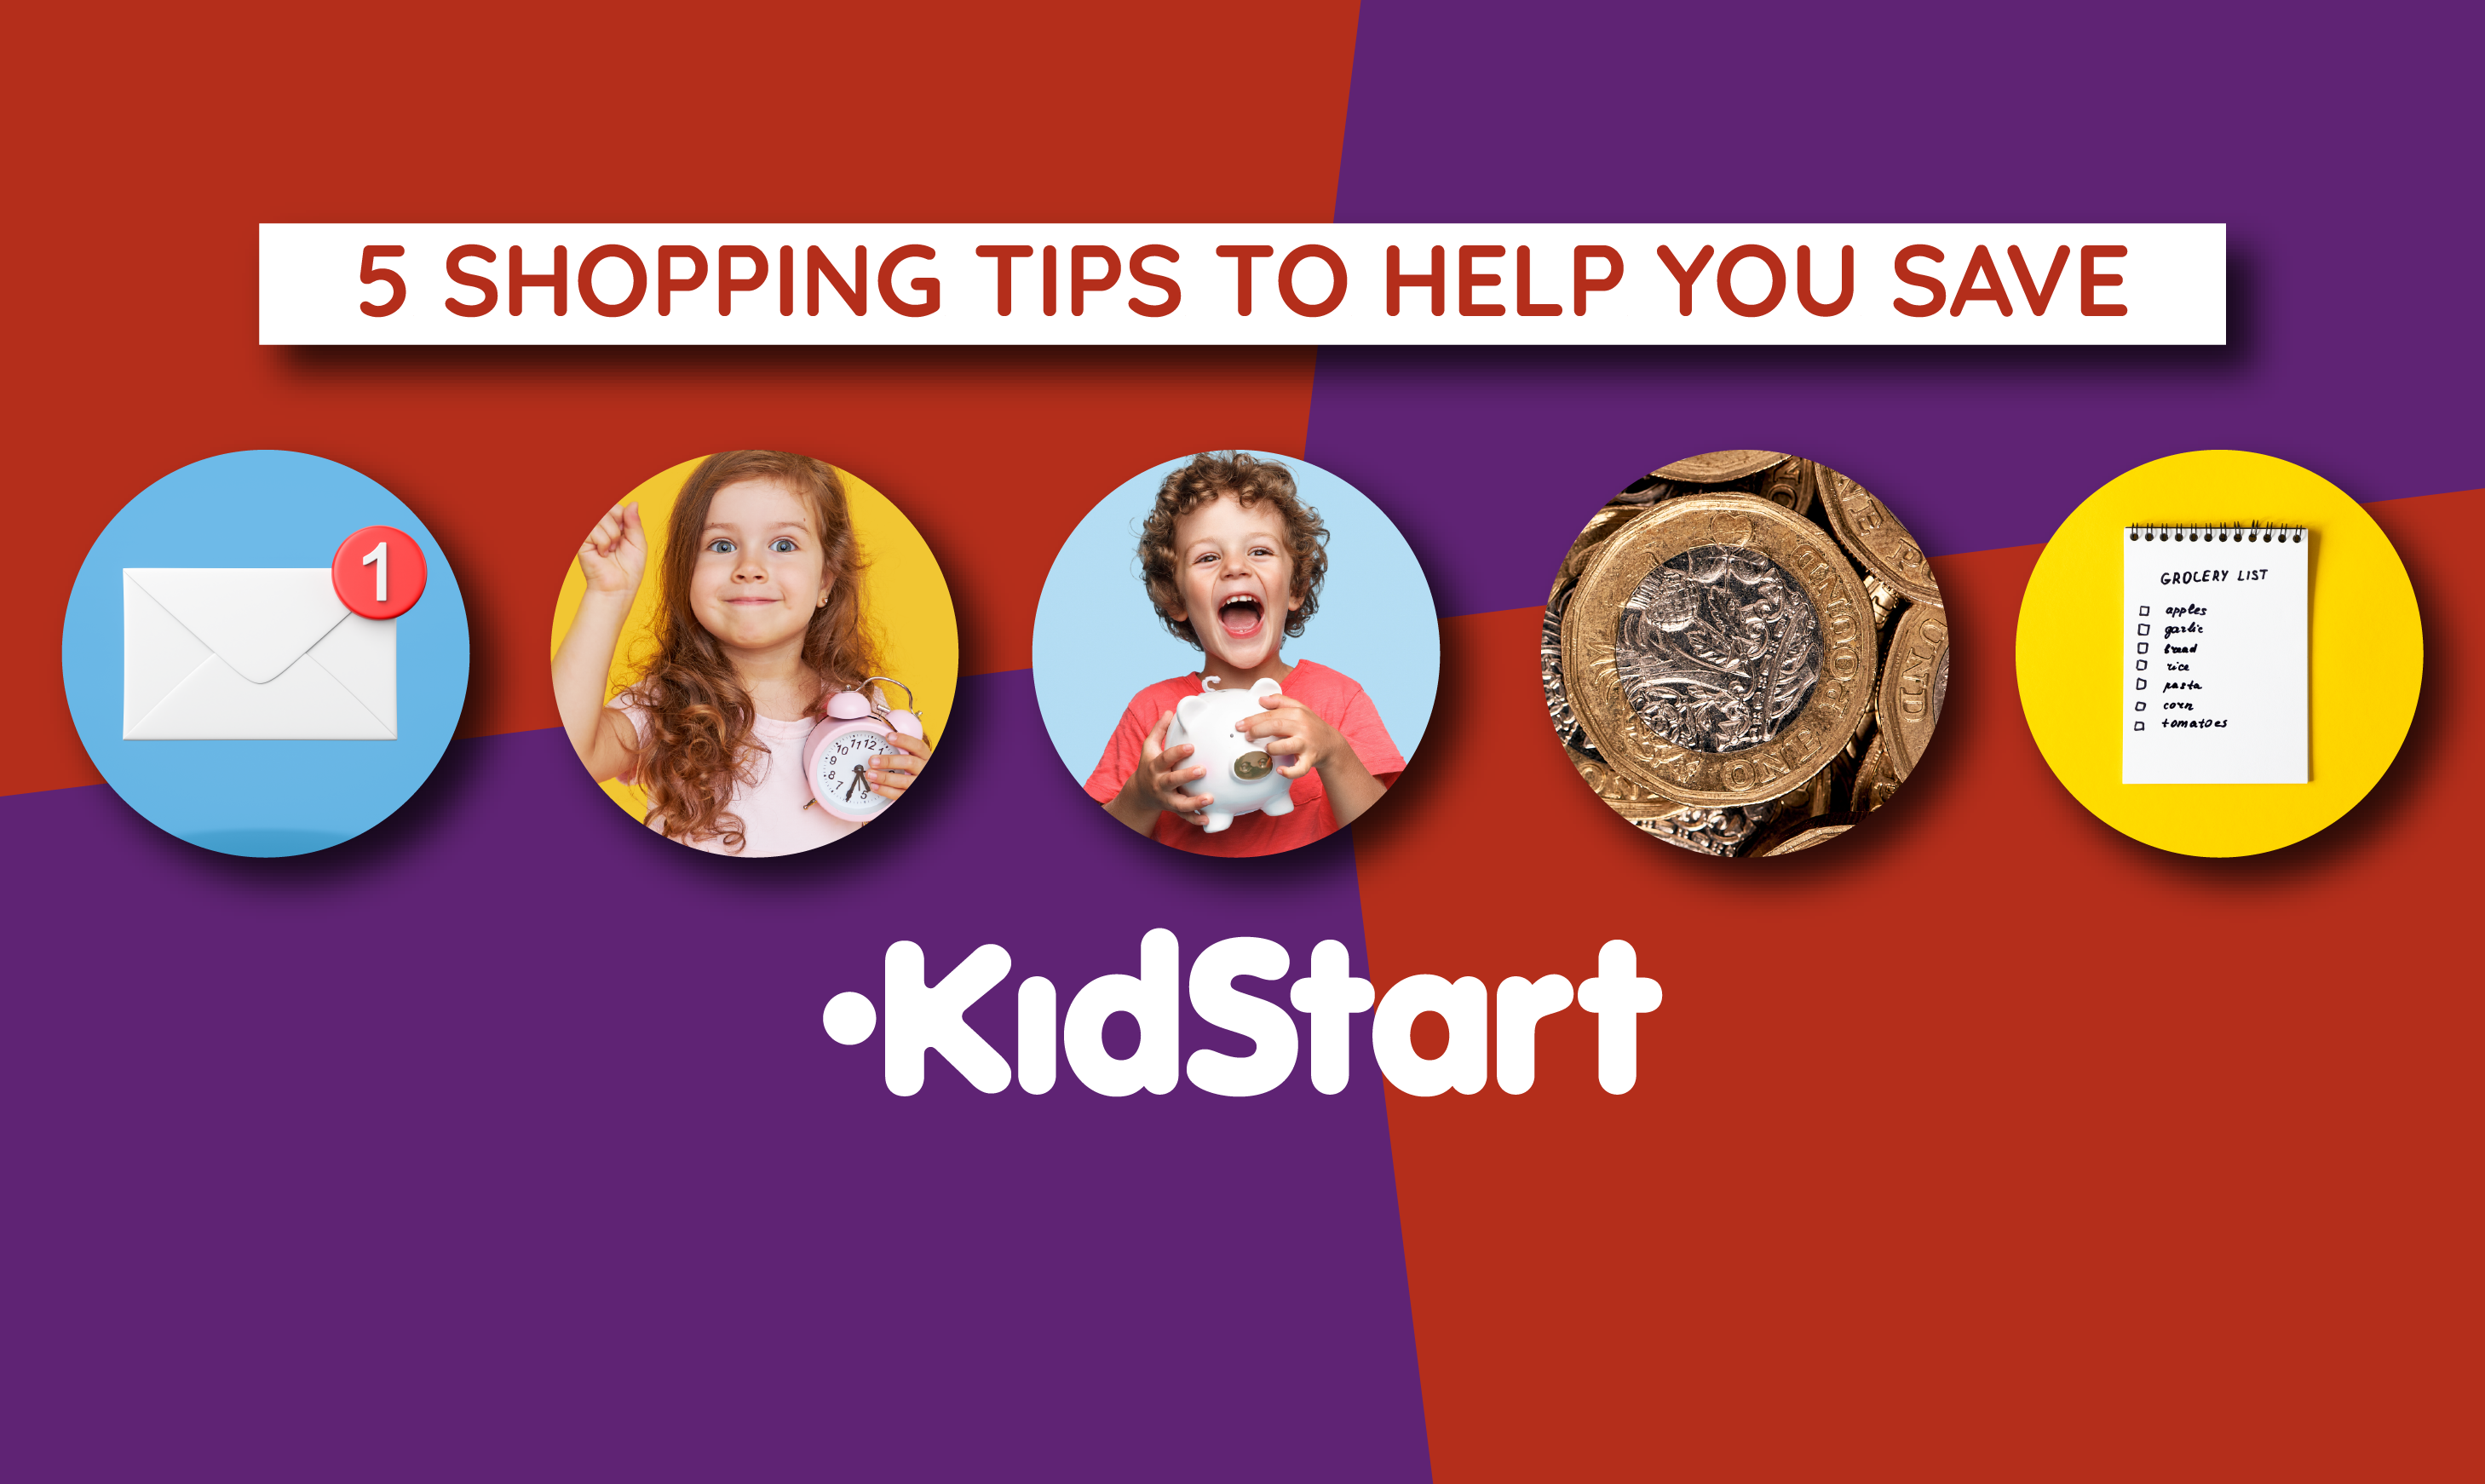 5 shopping tips to help you save